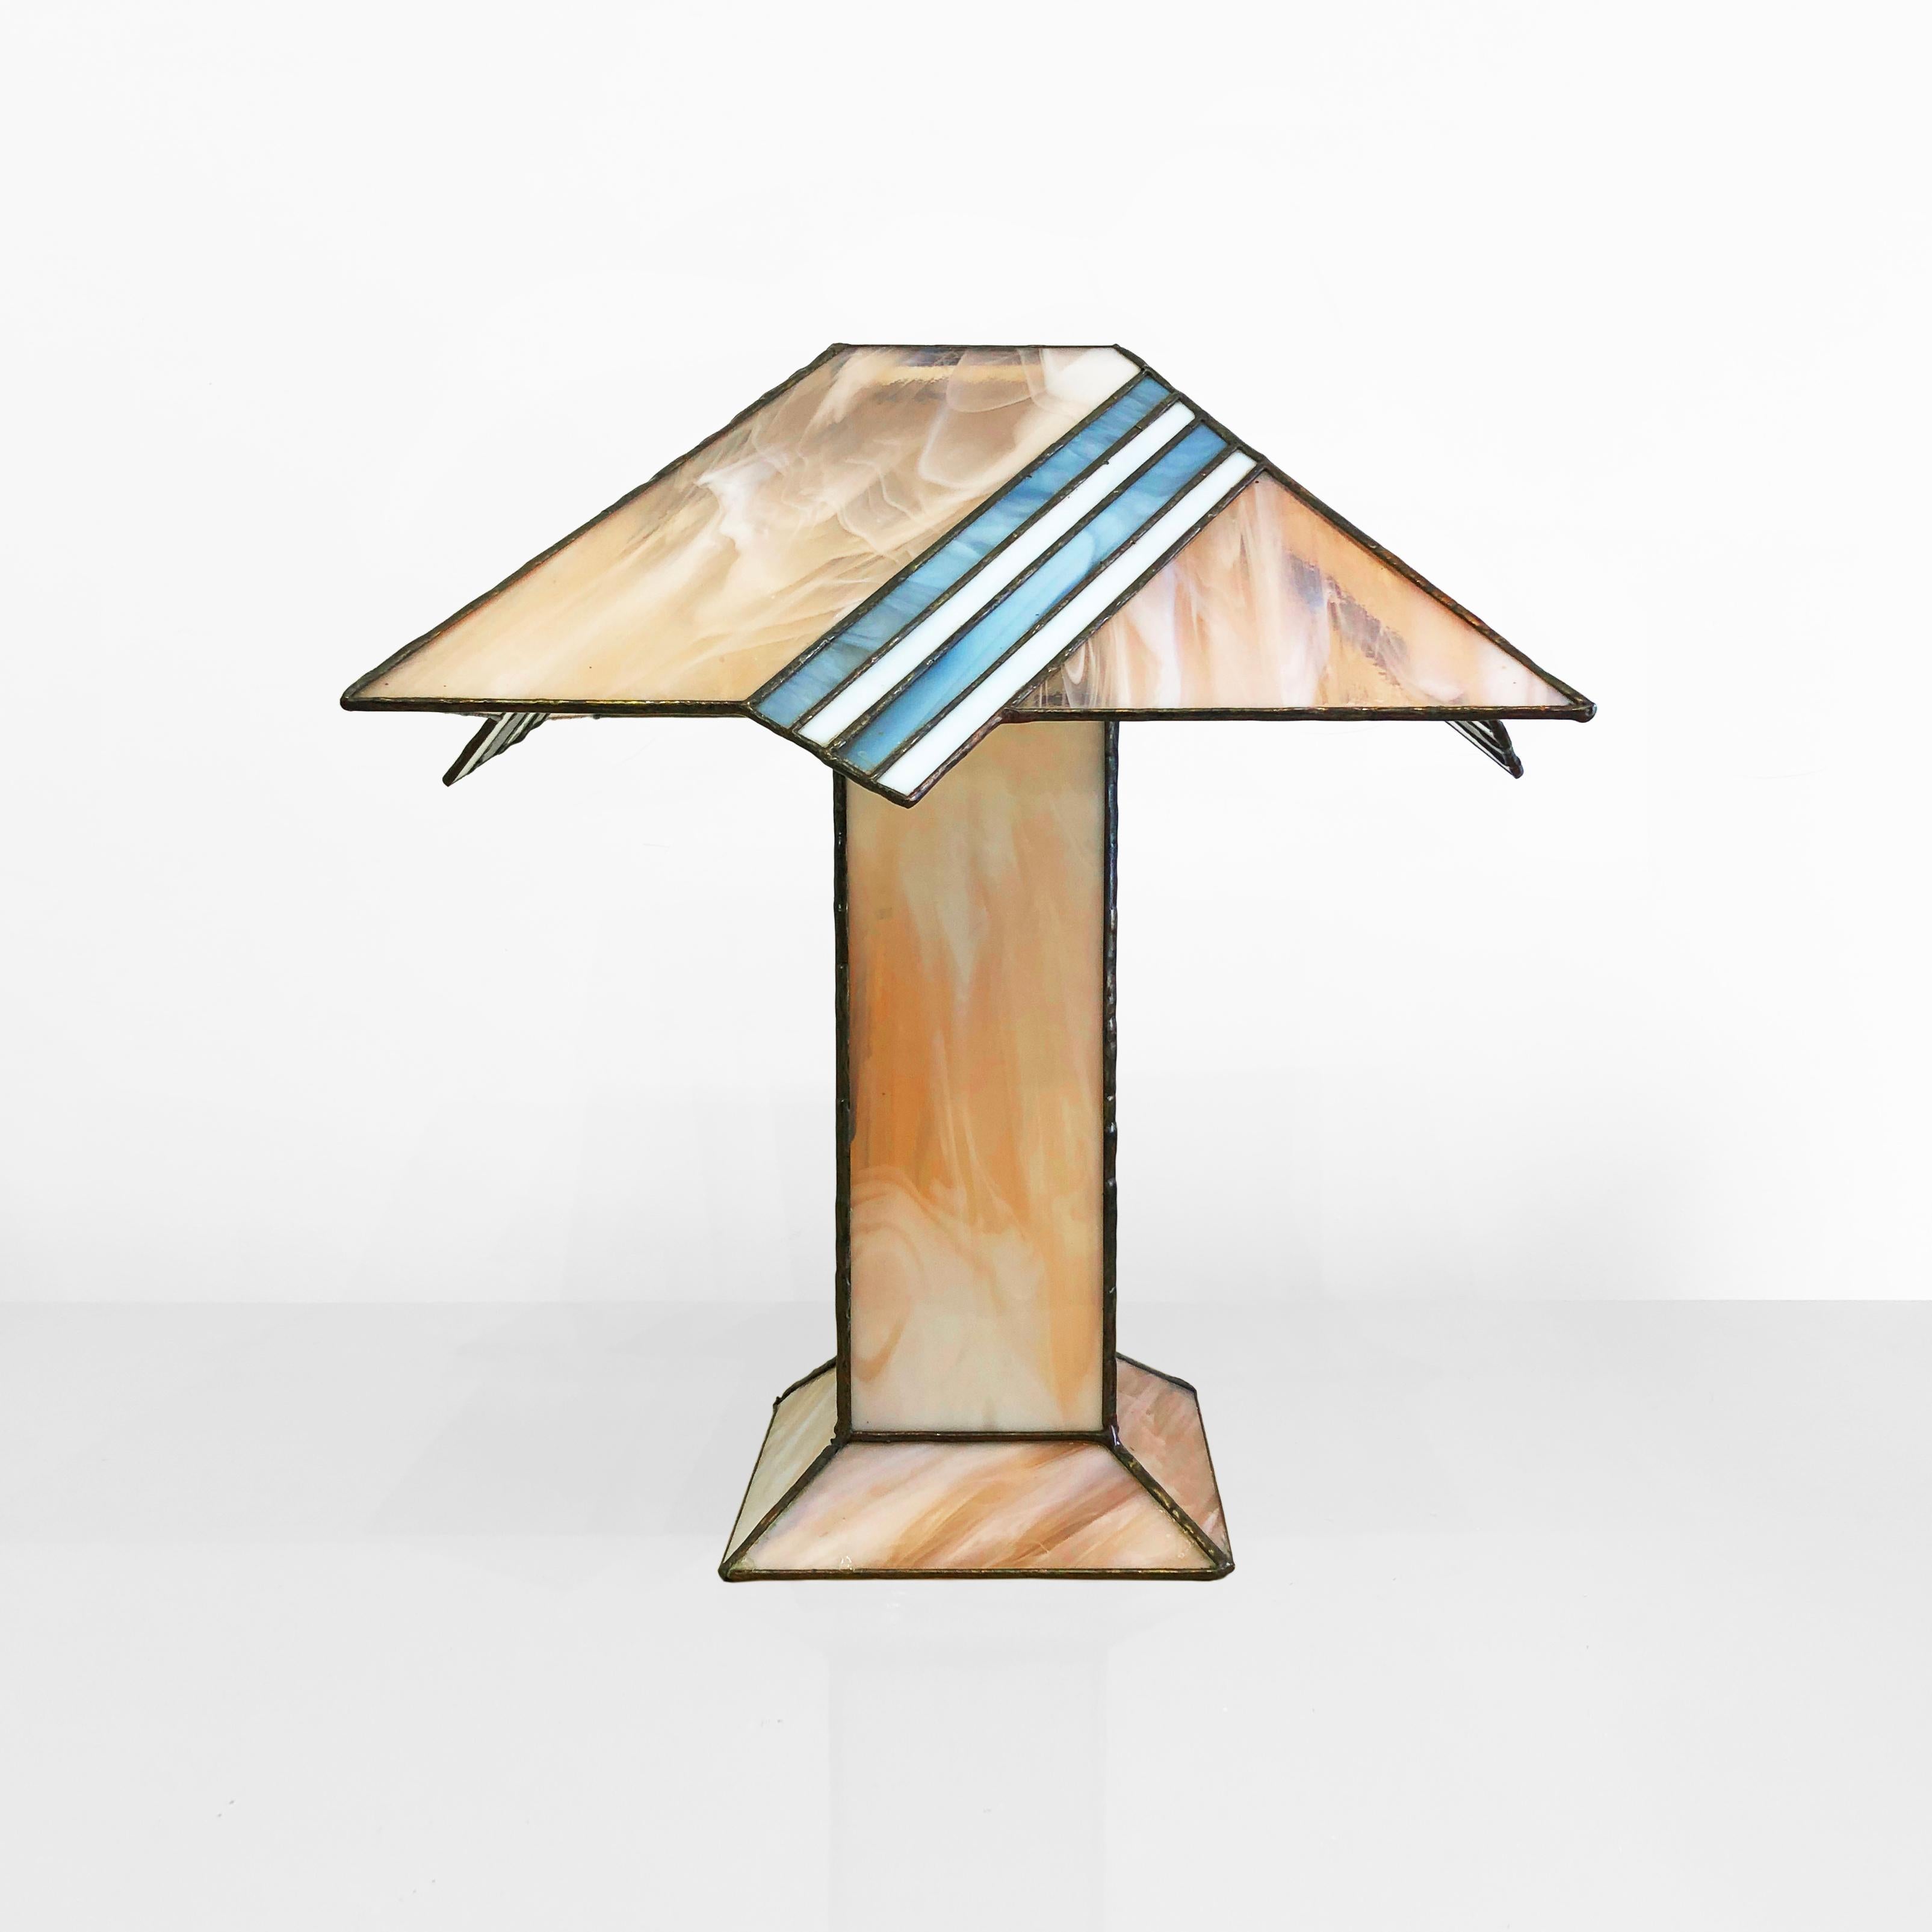 1980s stylish and elegant high quality table lamp in Tiffany Art Deco style. The shade and body are made of pinky salmon pastels and cream-coloured stained glass which features a diagonal stripped baby blue pattern on the shade. The stained glass